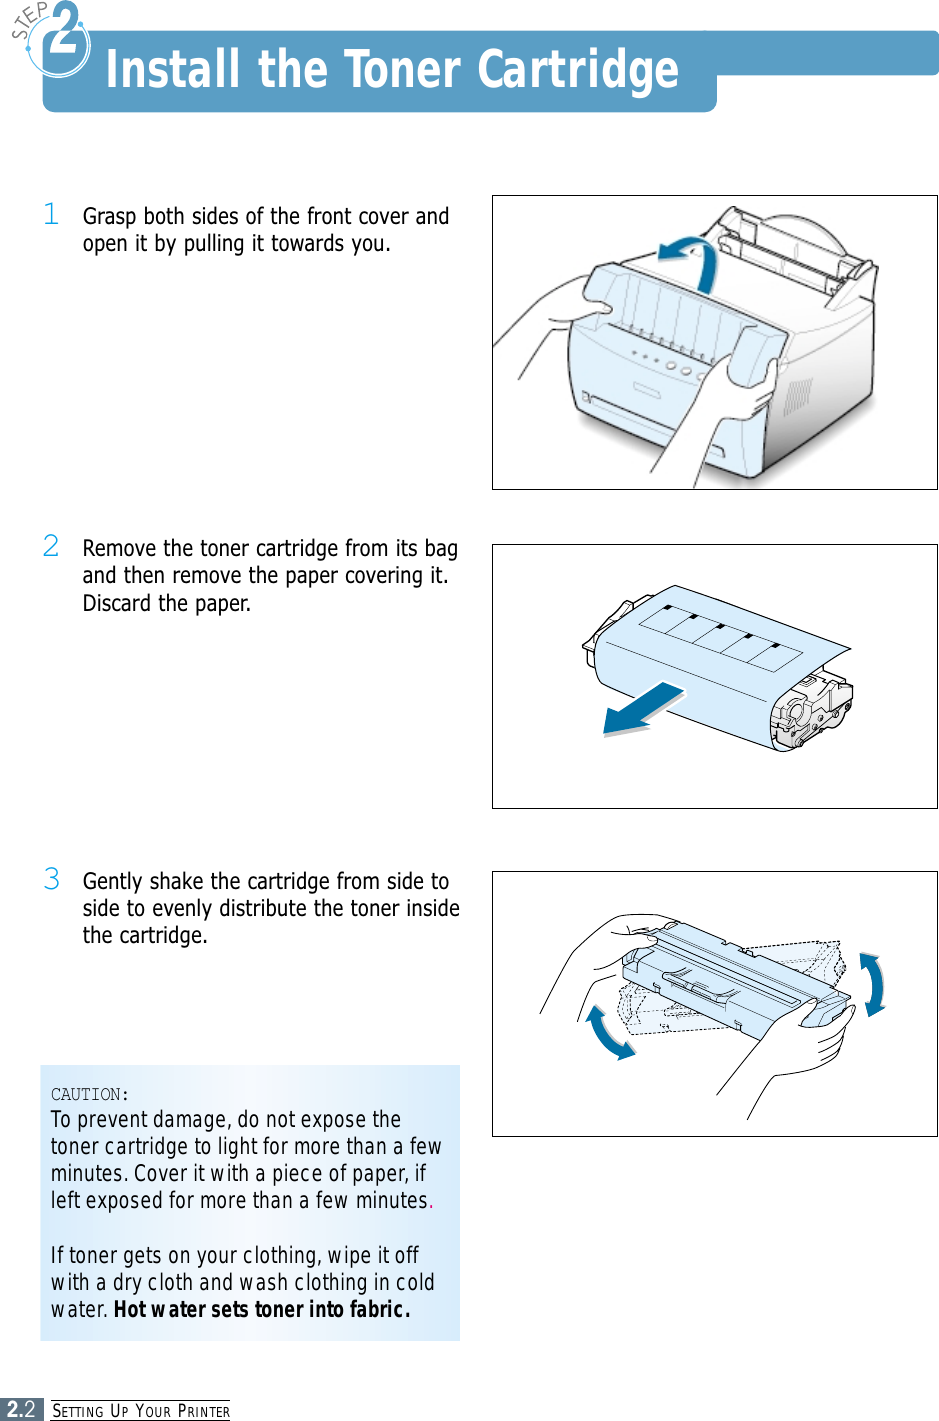 SETTING UPYOUR PRINTER2.21Grasp both sides of the front cover andopen it by pulling it towards you.2Remove the toner cartridge from its bagand then remove the paper covering it.Discard the paper.3Gently shake the cartridge from side toside to evenly distribute the toner insidethe cartridge.CAUTION:To prevent damage, do not expose thetoner cartridge to light for more than a fewminutes. Cover it with a piece of paper, ifleft exposed for more than a few minutes.If toner gets on your clothing, wipe it offwith a dry cloth and wash clothing in coldwater. Hot water sets toner into fabric.Install the Toner Cartridge